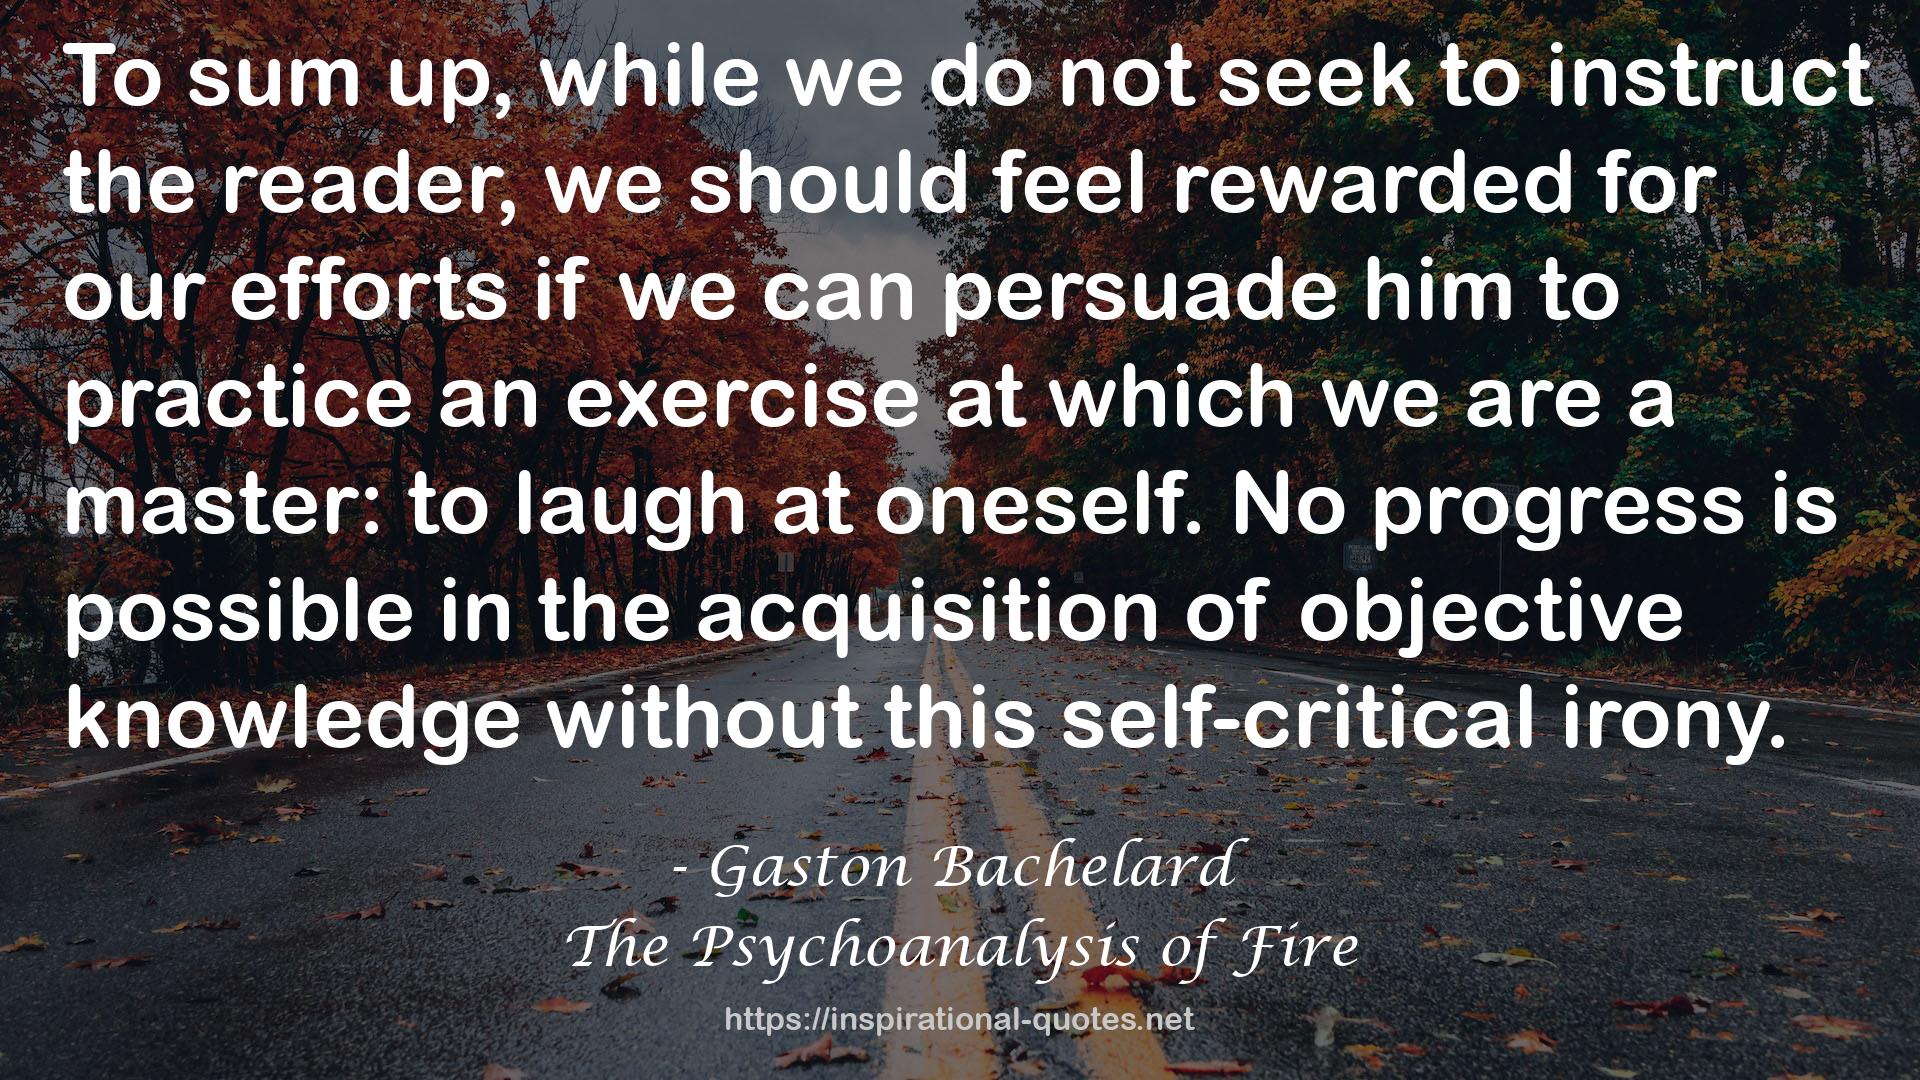 The Psychoanalysis of Fire QUOTES